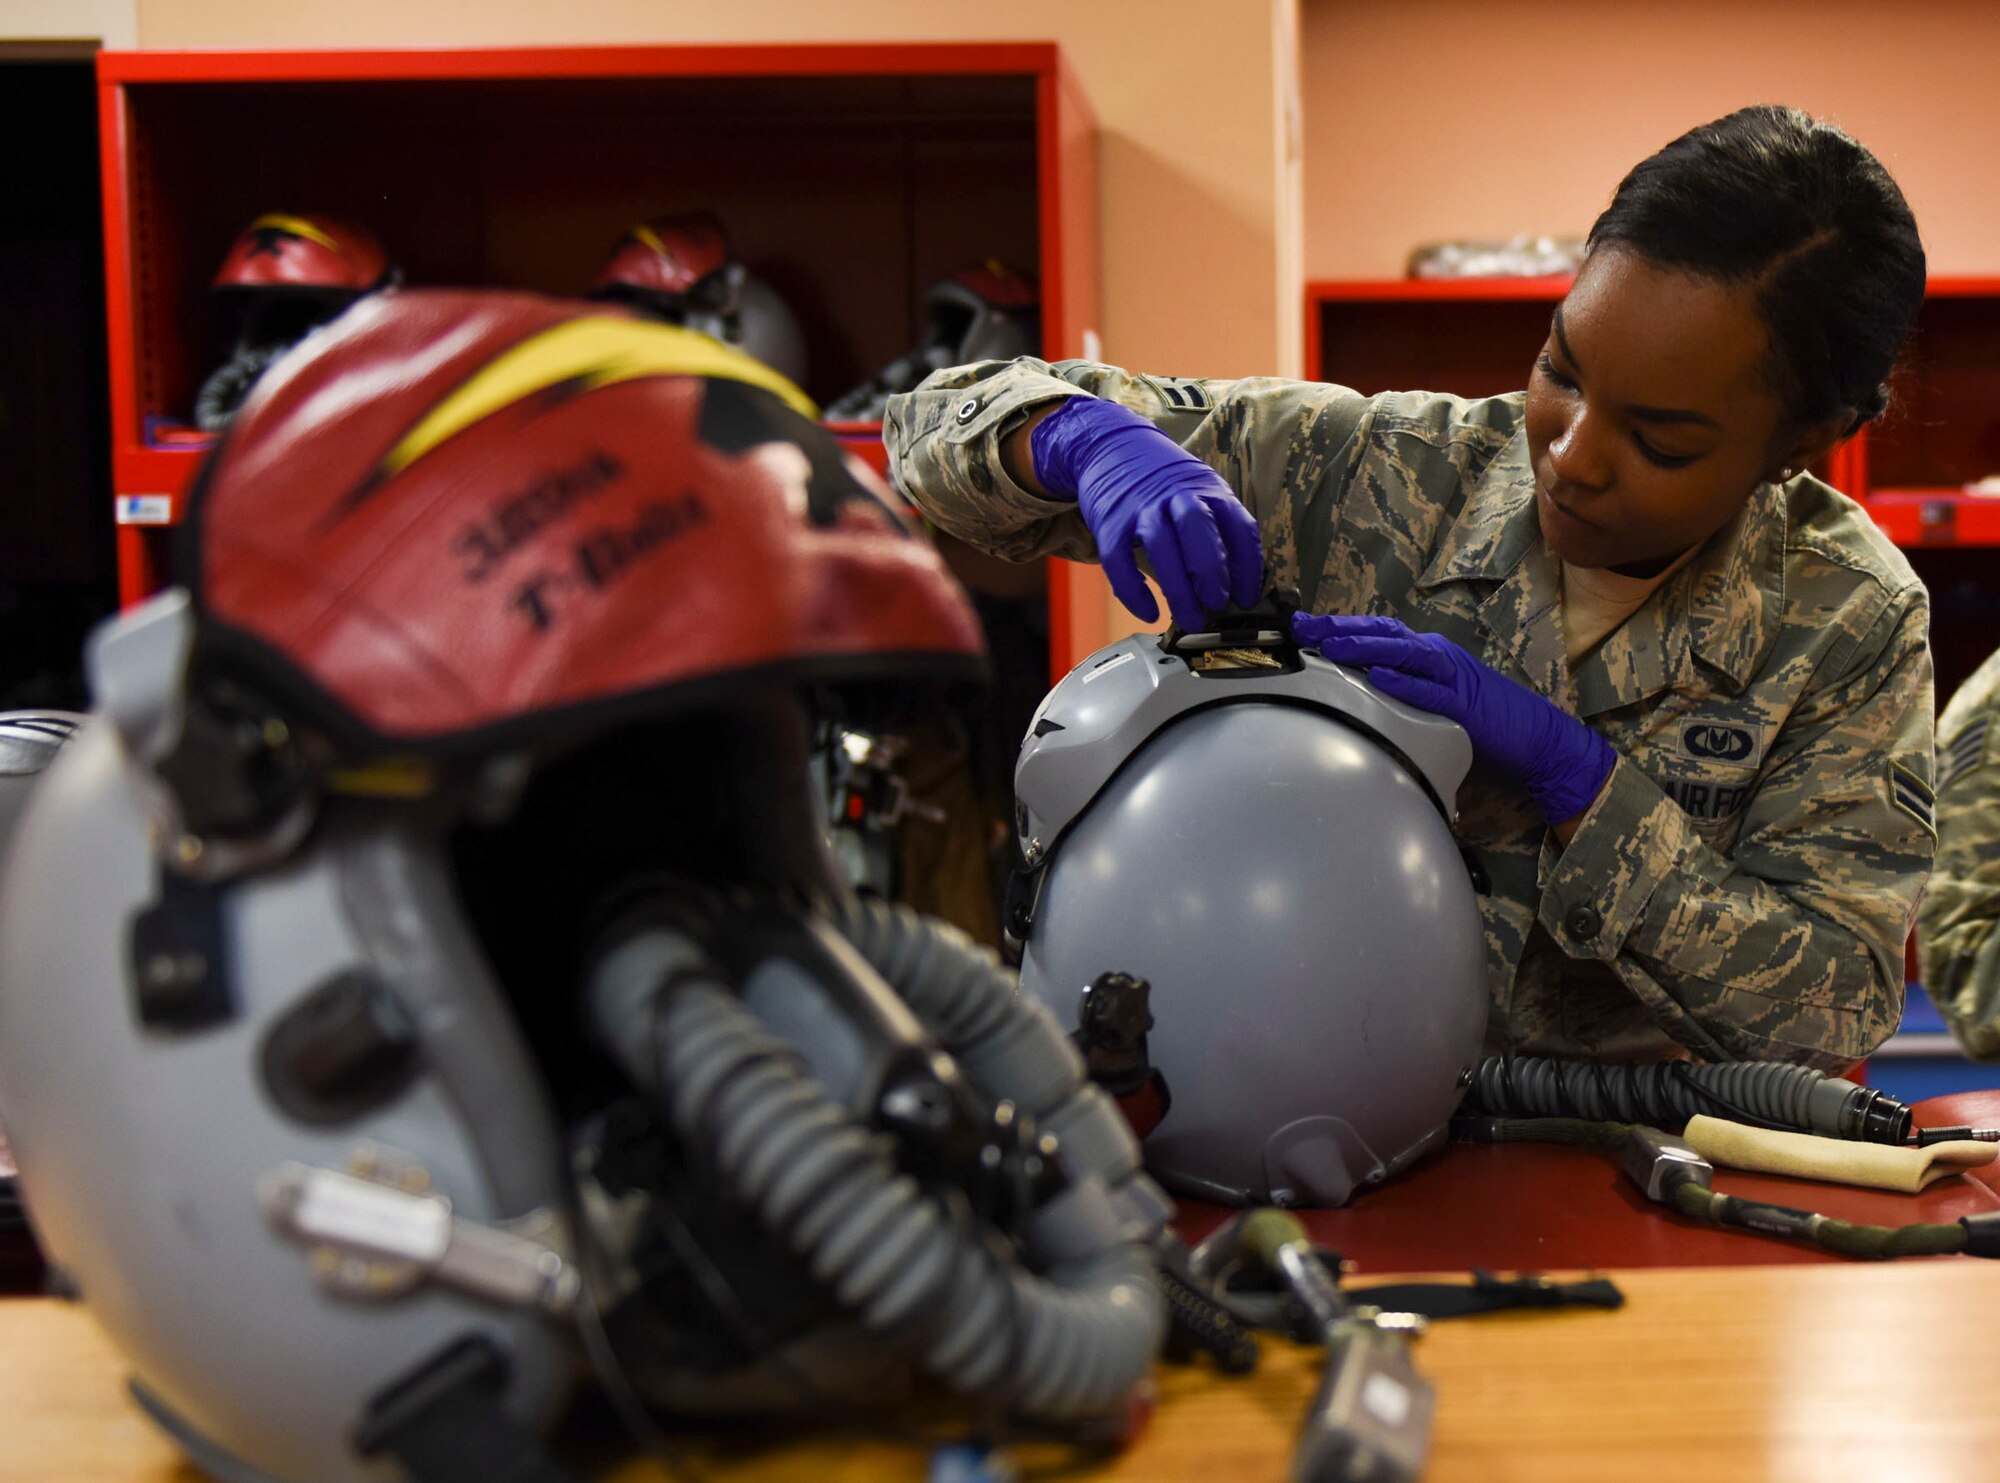 Airman 1st Class Kayla Stennis, 366th Operations Support Squadron aircrew flight equipment journeyman, adjusts pilots' helmets before takeoff at Mountain Home Air Force Base, Idaho, March 14, 2016. The helmets must be thoroughly inspected and in perfect condition before use. (U.S. Air Force photo by Airman Alaysia Berry/RELEASED)